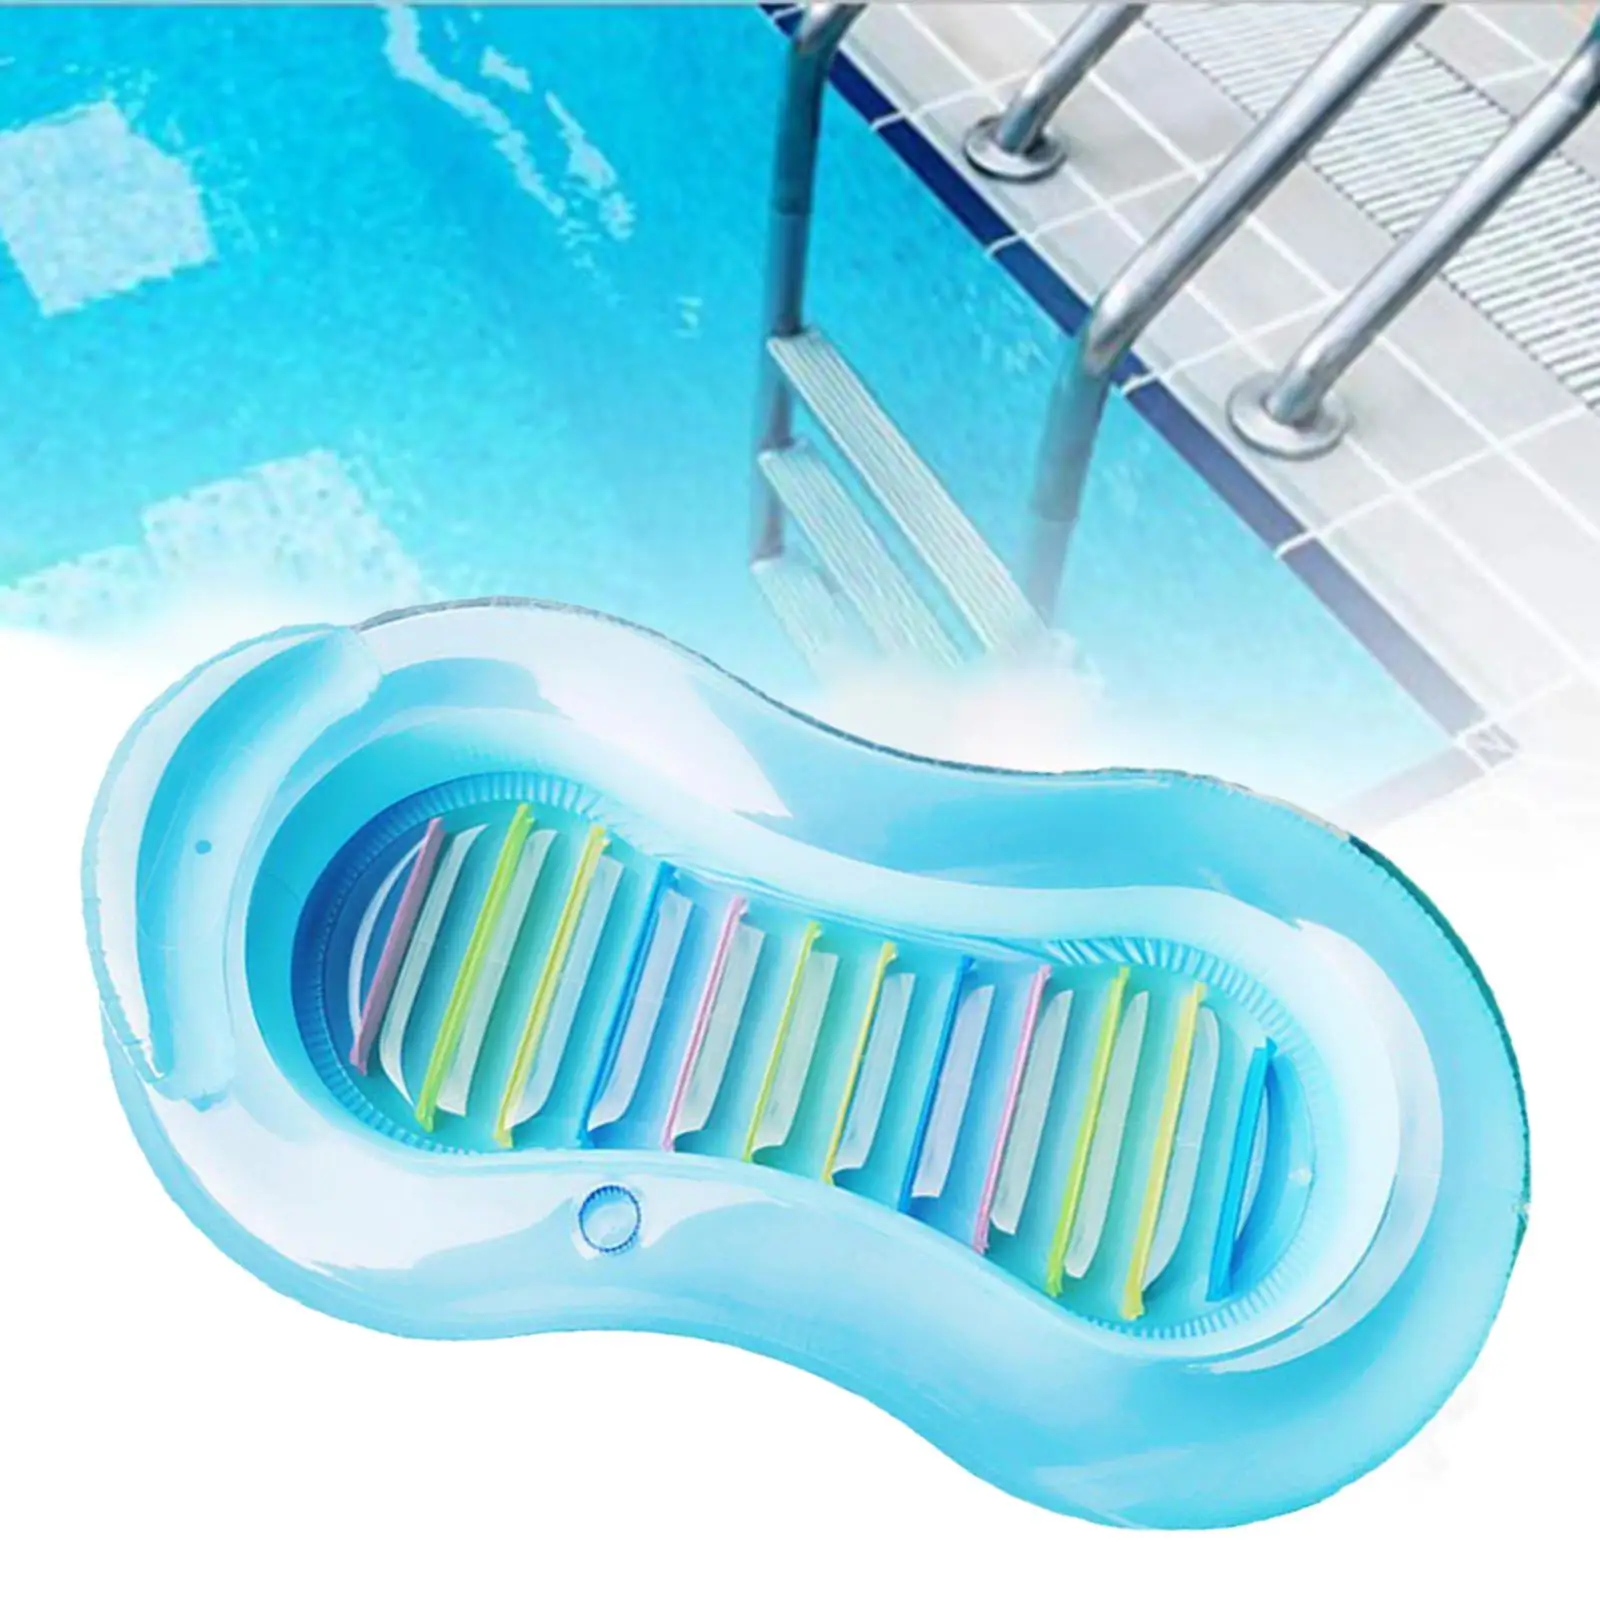 Inflatable Lounge Chair Water Hammock Air Mattress Lounge Bed Beach Summer Pool Access for Outdoor Water Sports Swimming Pool